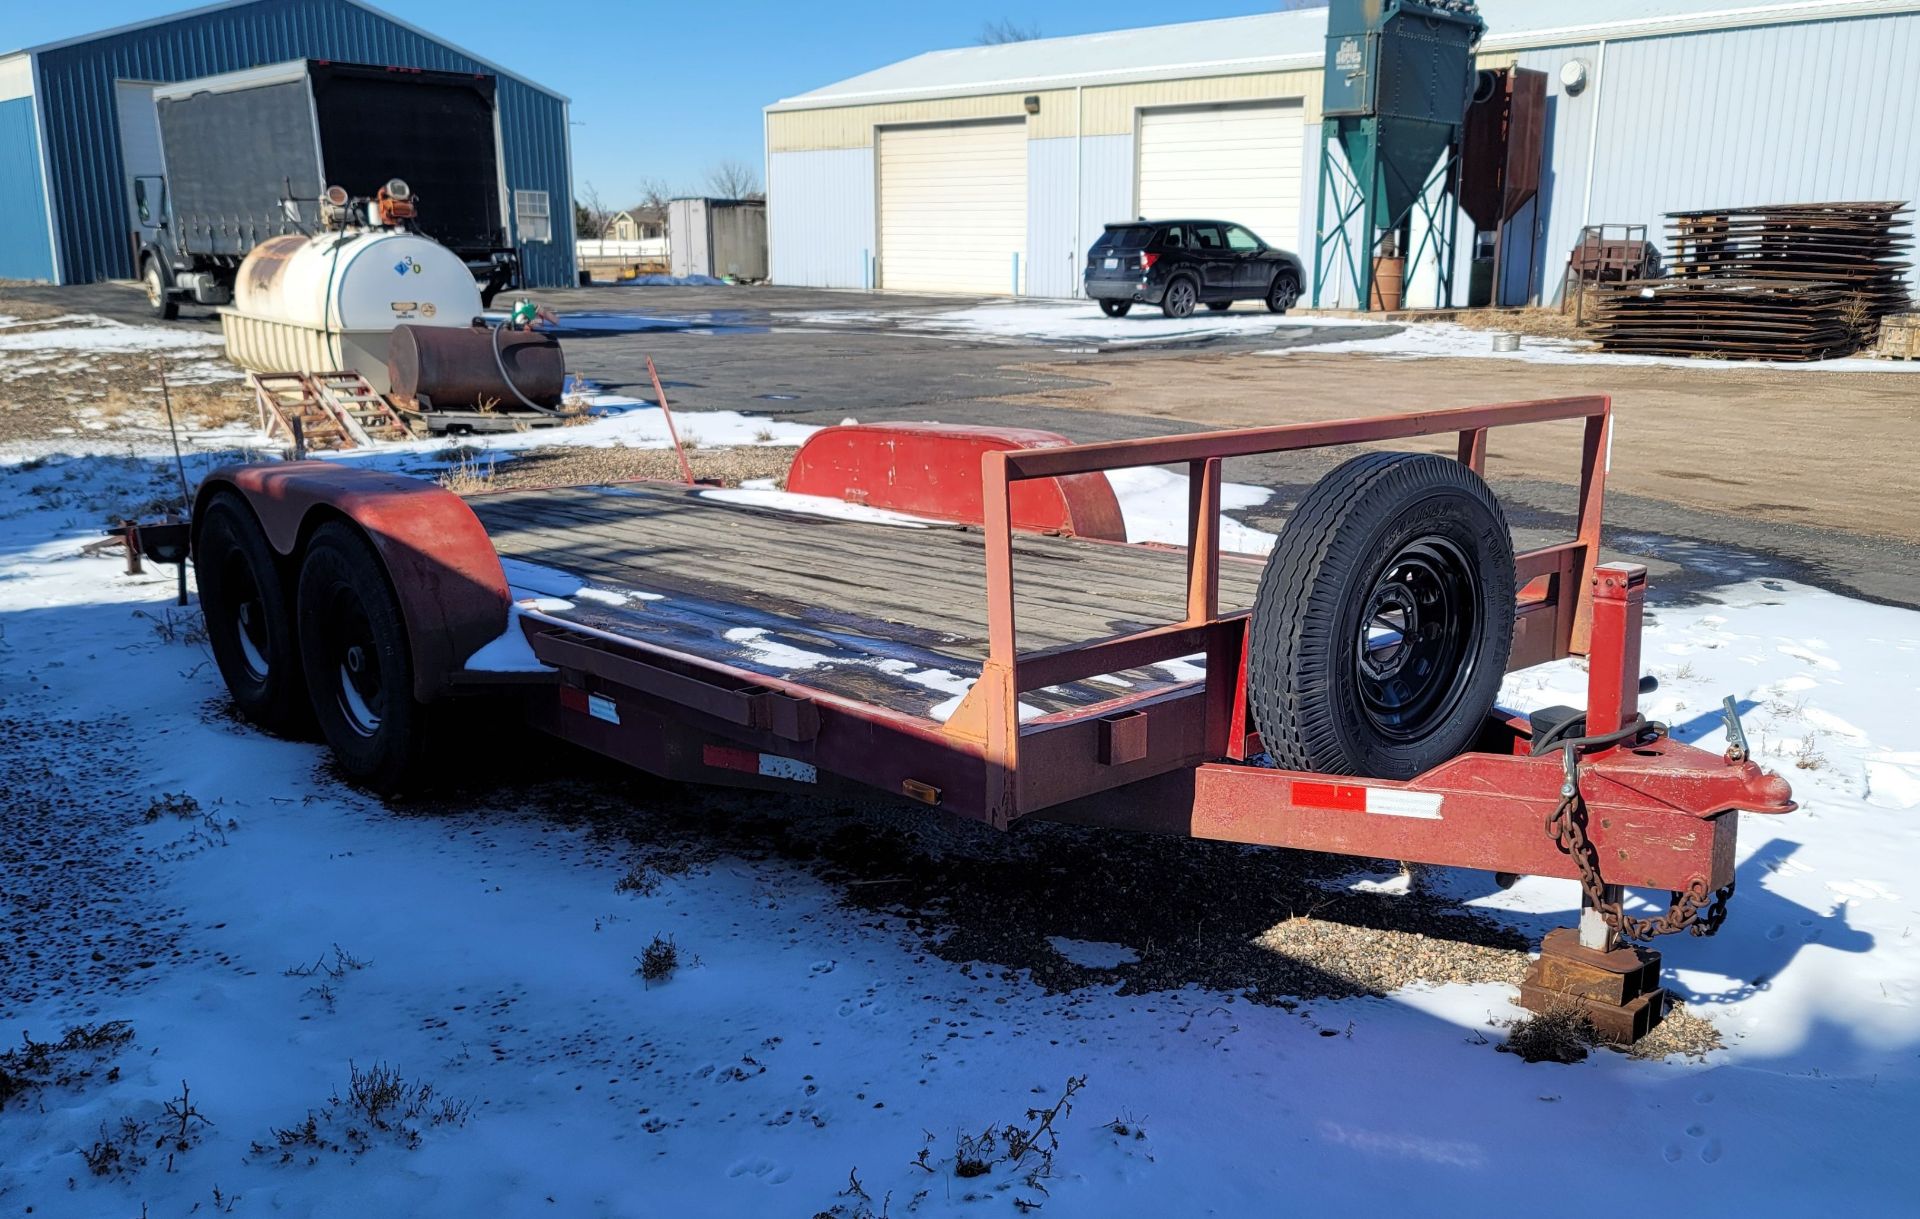 FLATBED TRAILER, 16' X 80", LOADING RAMP, DUAL AXLE, BUMPER PULL, SPARE TIRE, (2) 60" X 15" BED LOAD - Image 2 of 4